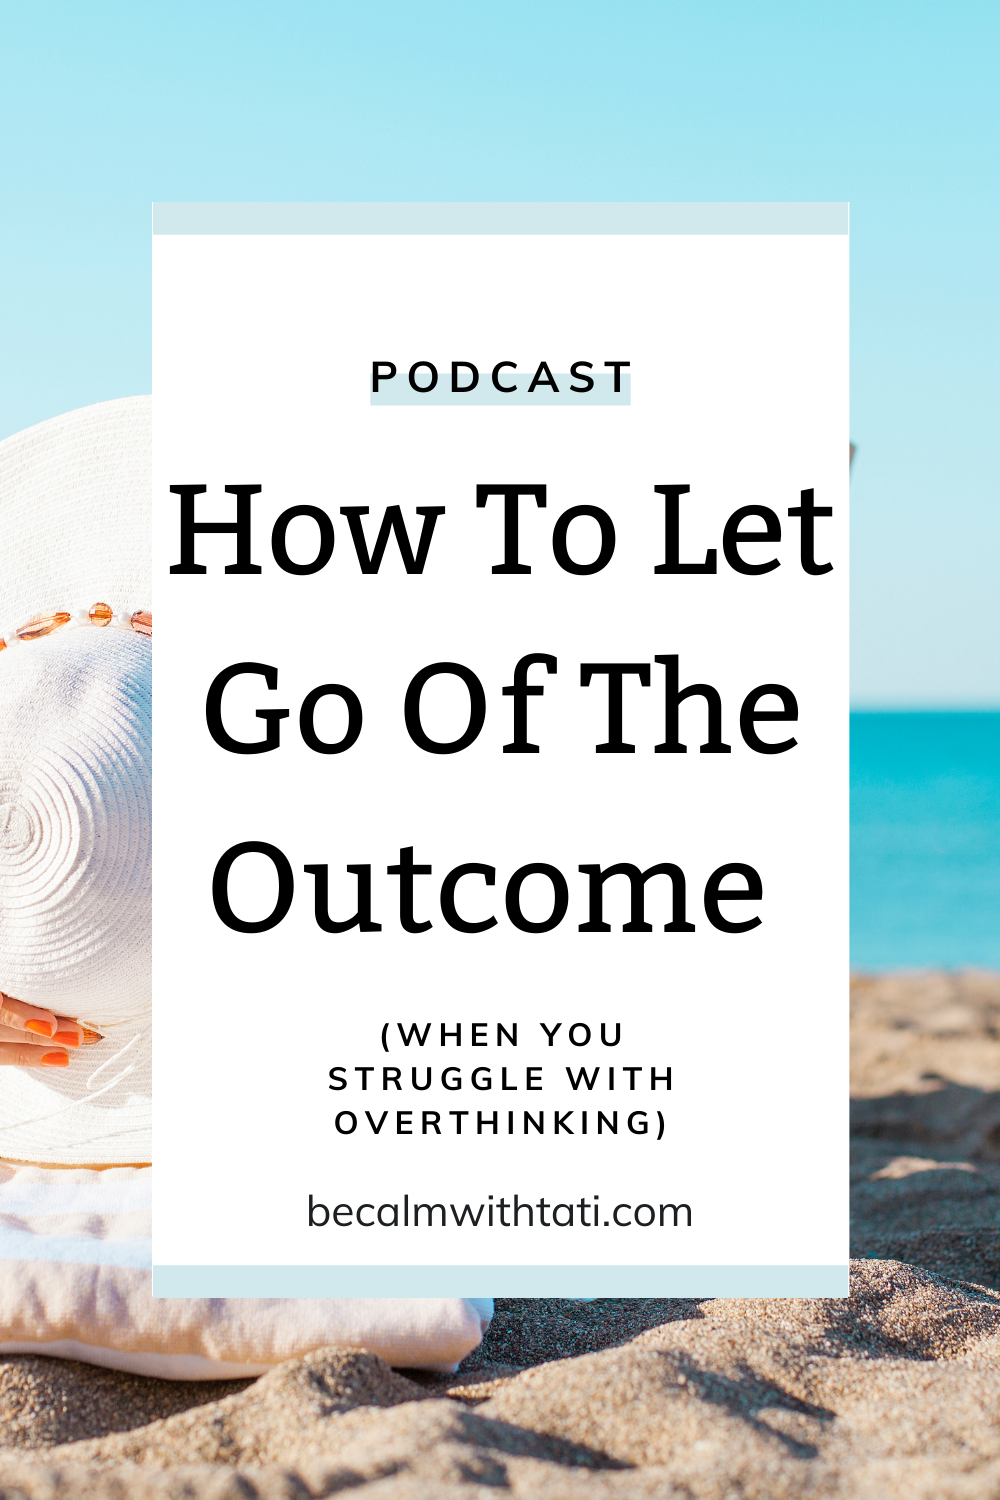 How To Let Go Of The Outcome (When You Struggle With Overthinking)